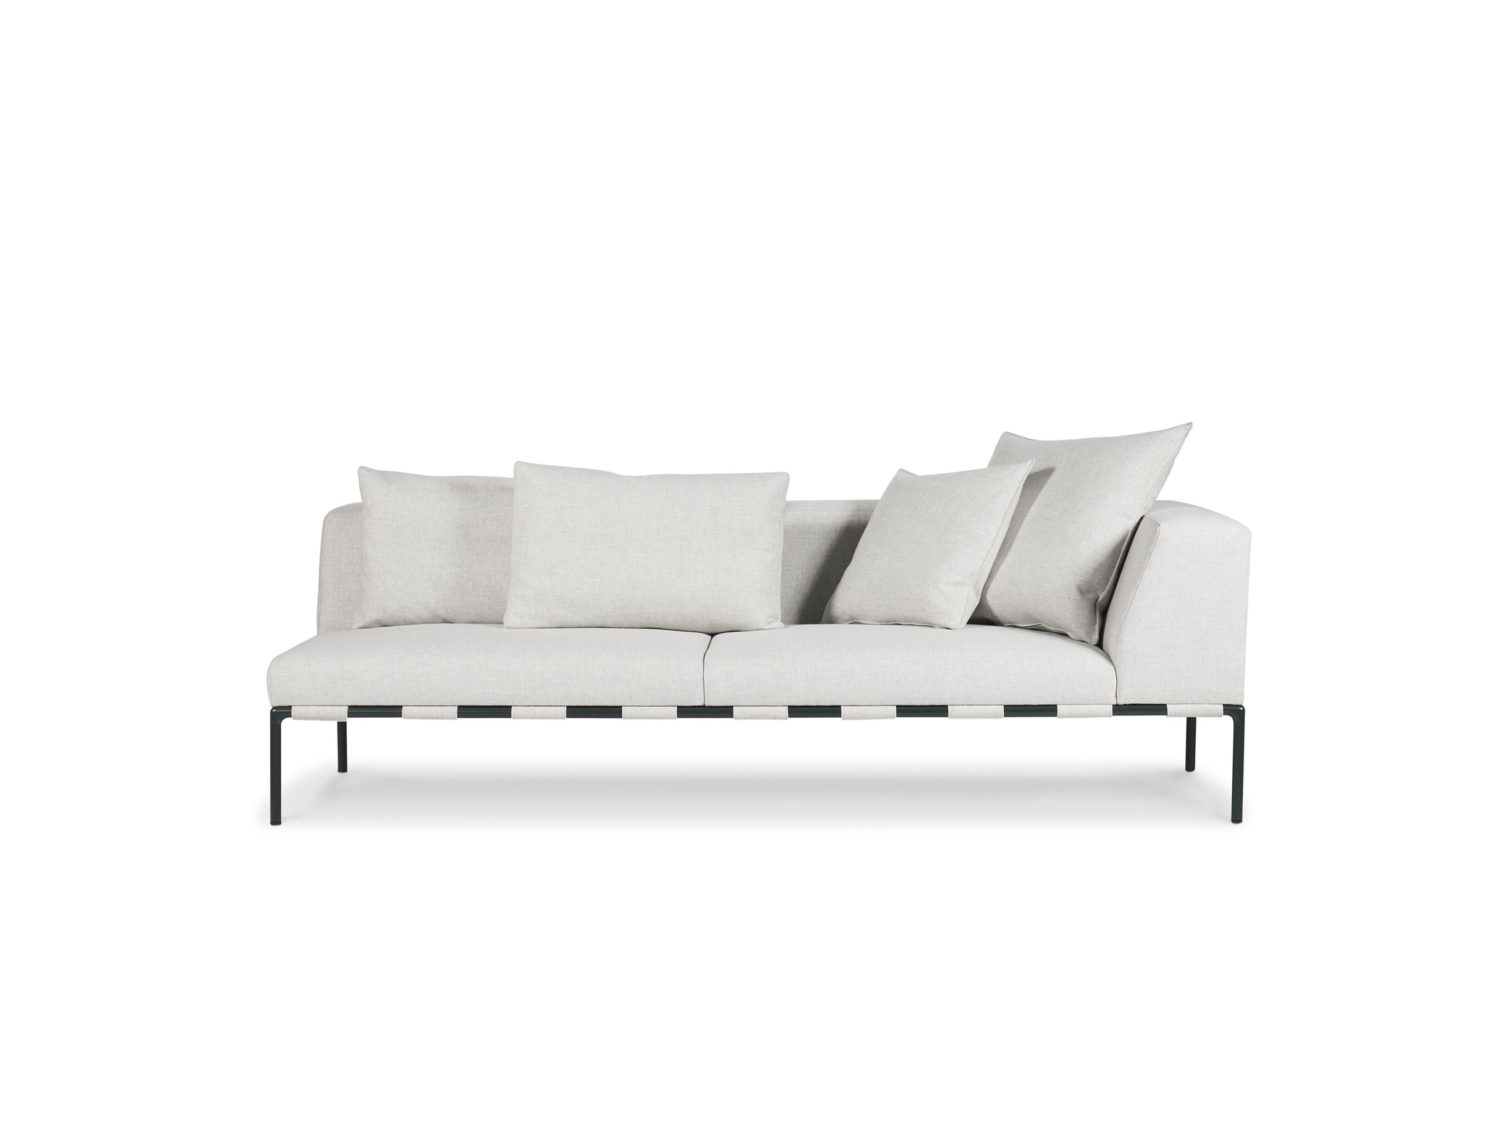 South Sofa By Christophe Pillet 4